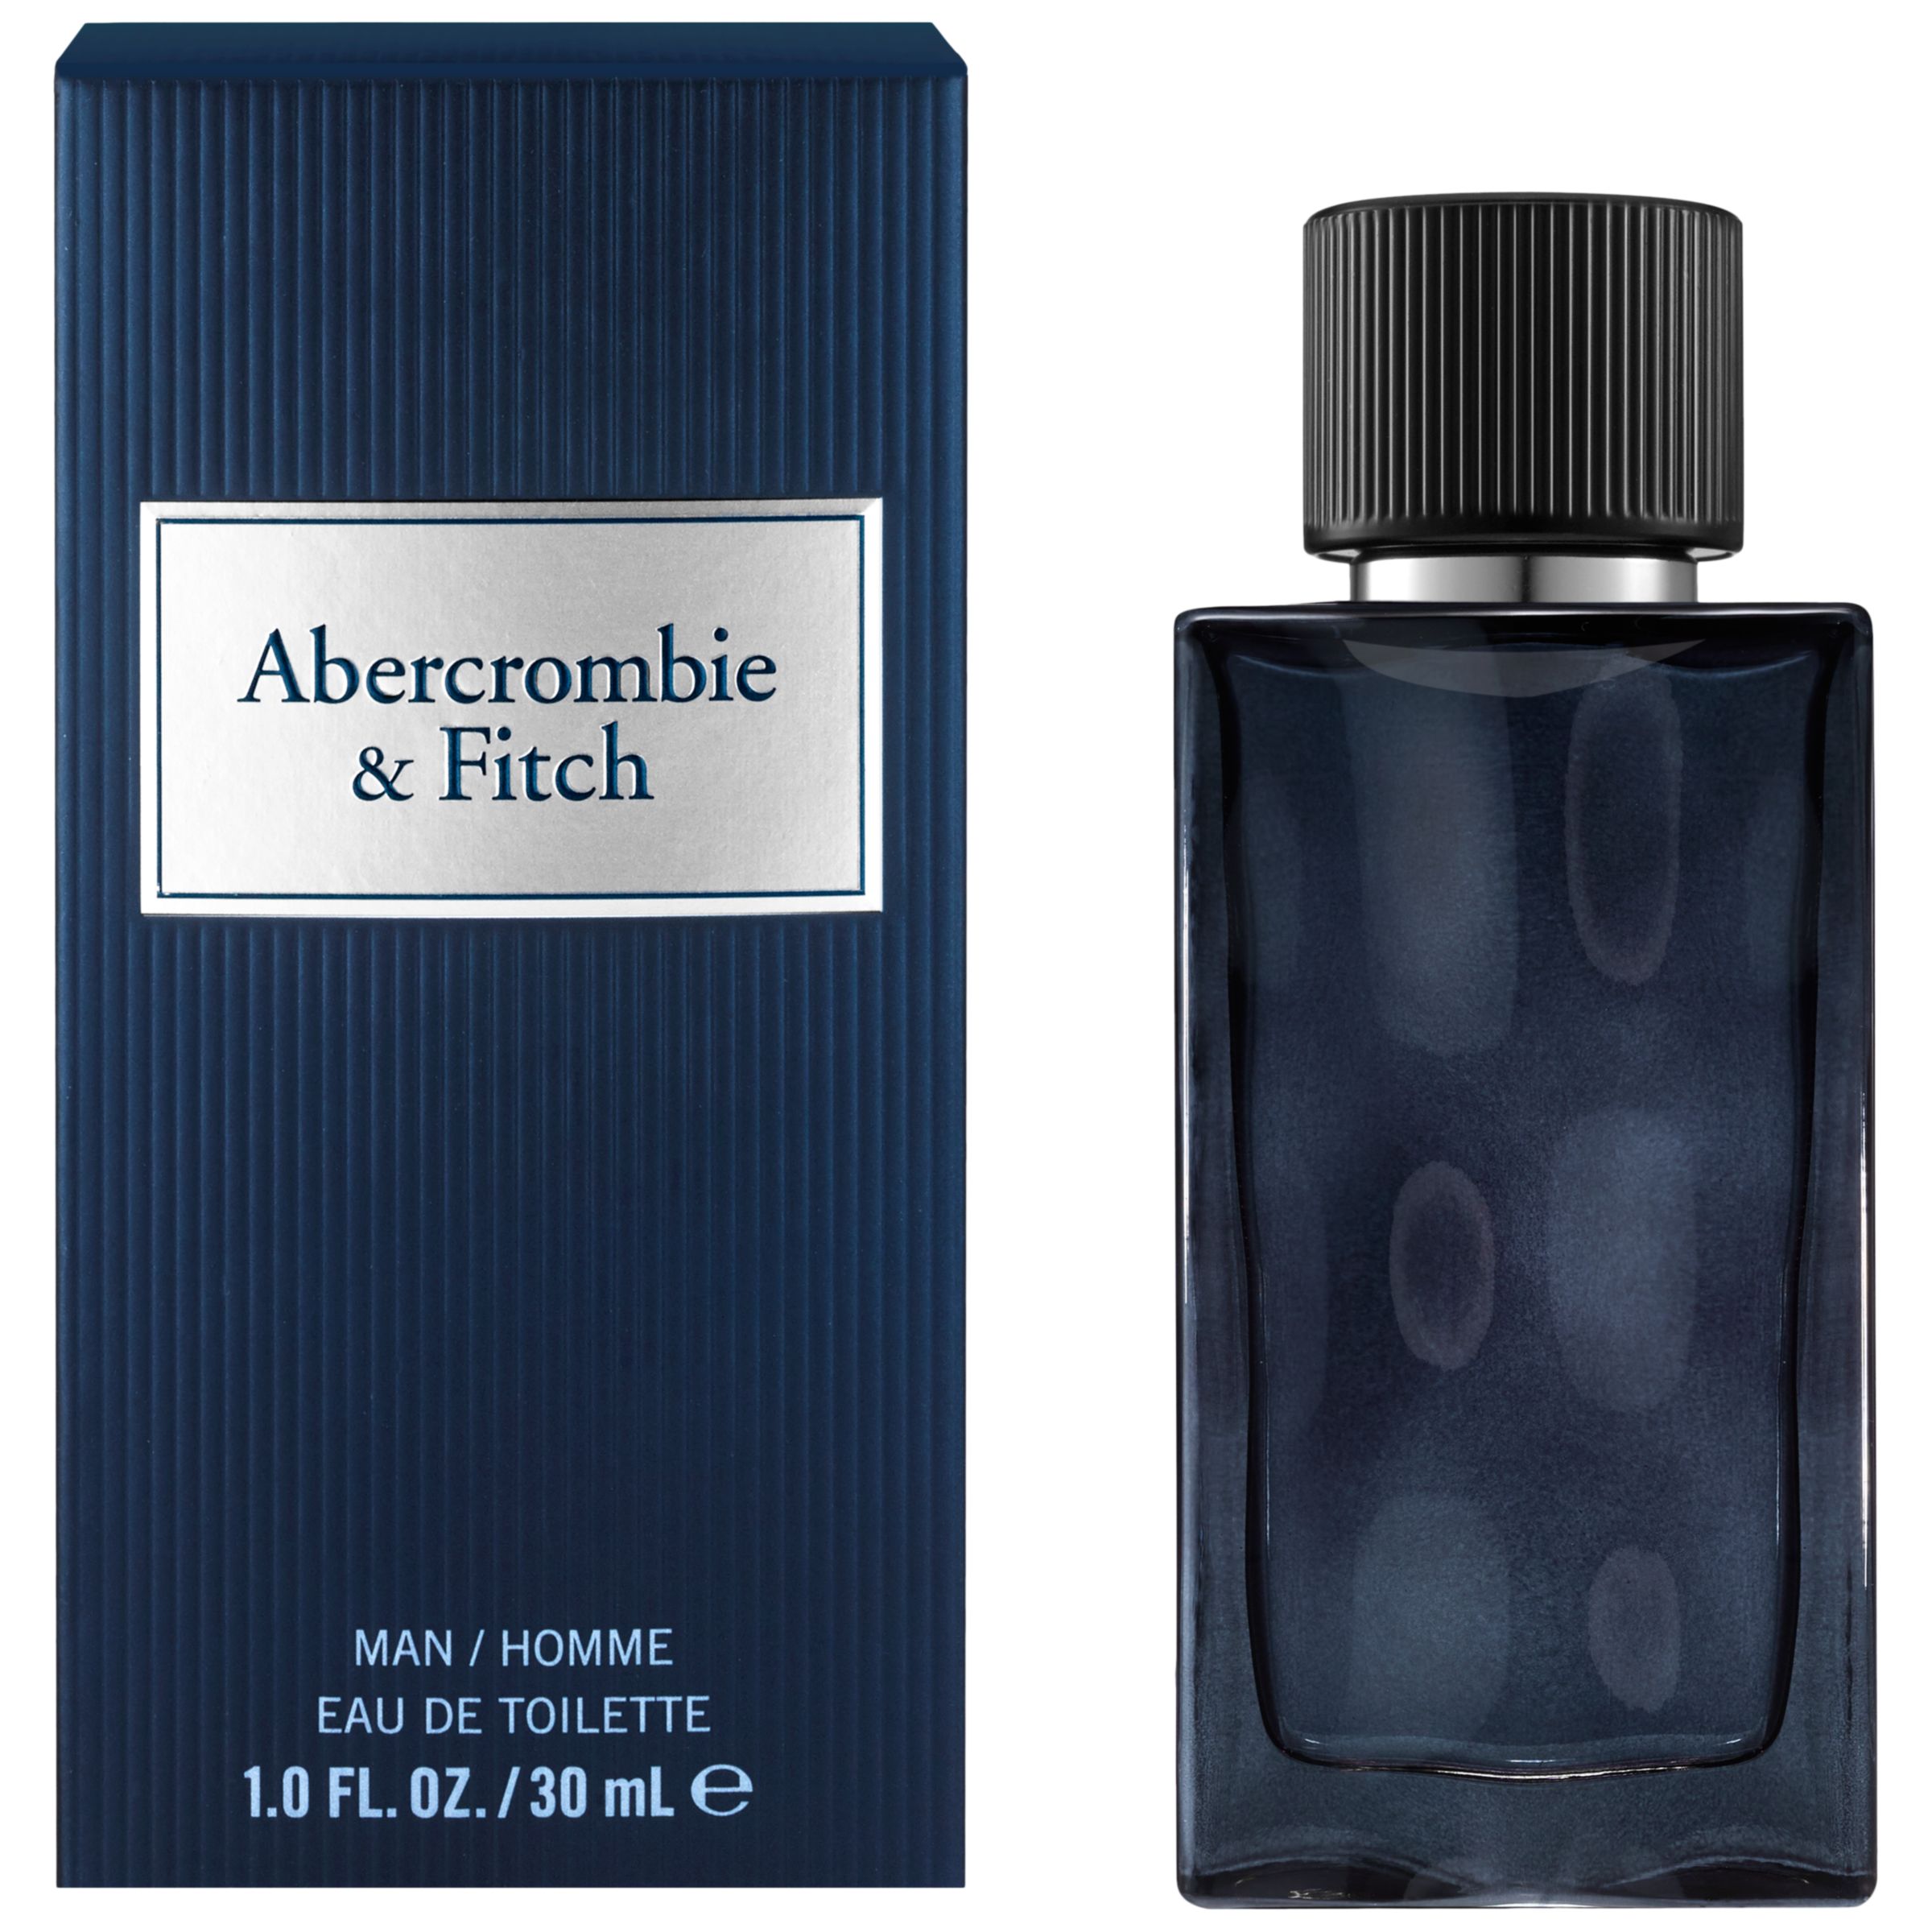 abercrombie and fitch aftershave first instinct